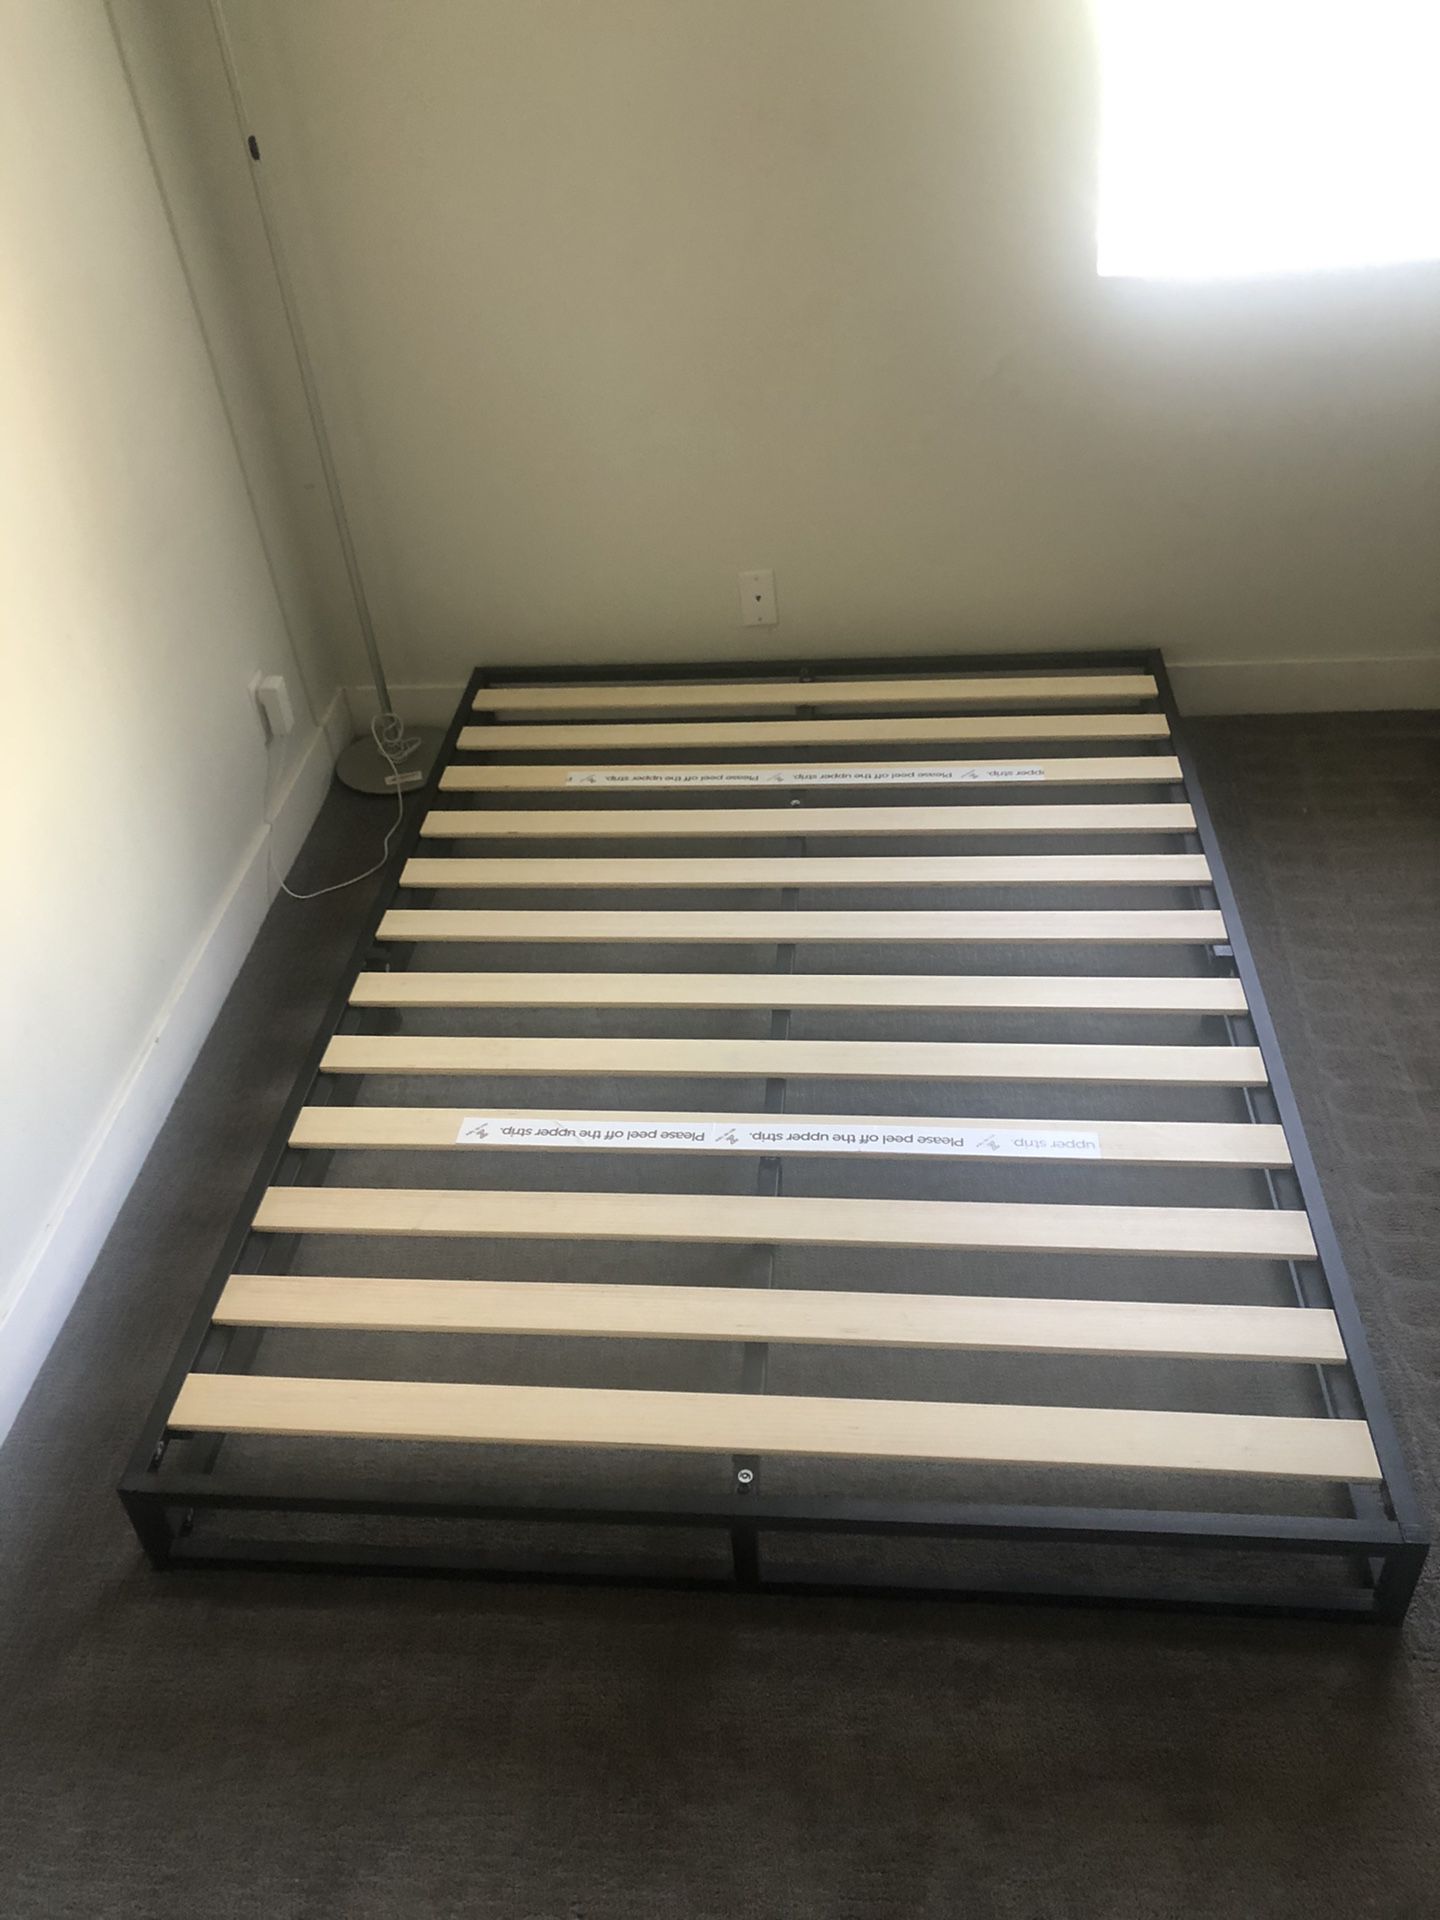 IKEA full size mattresses and bed frame